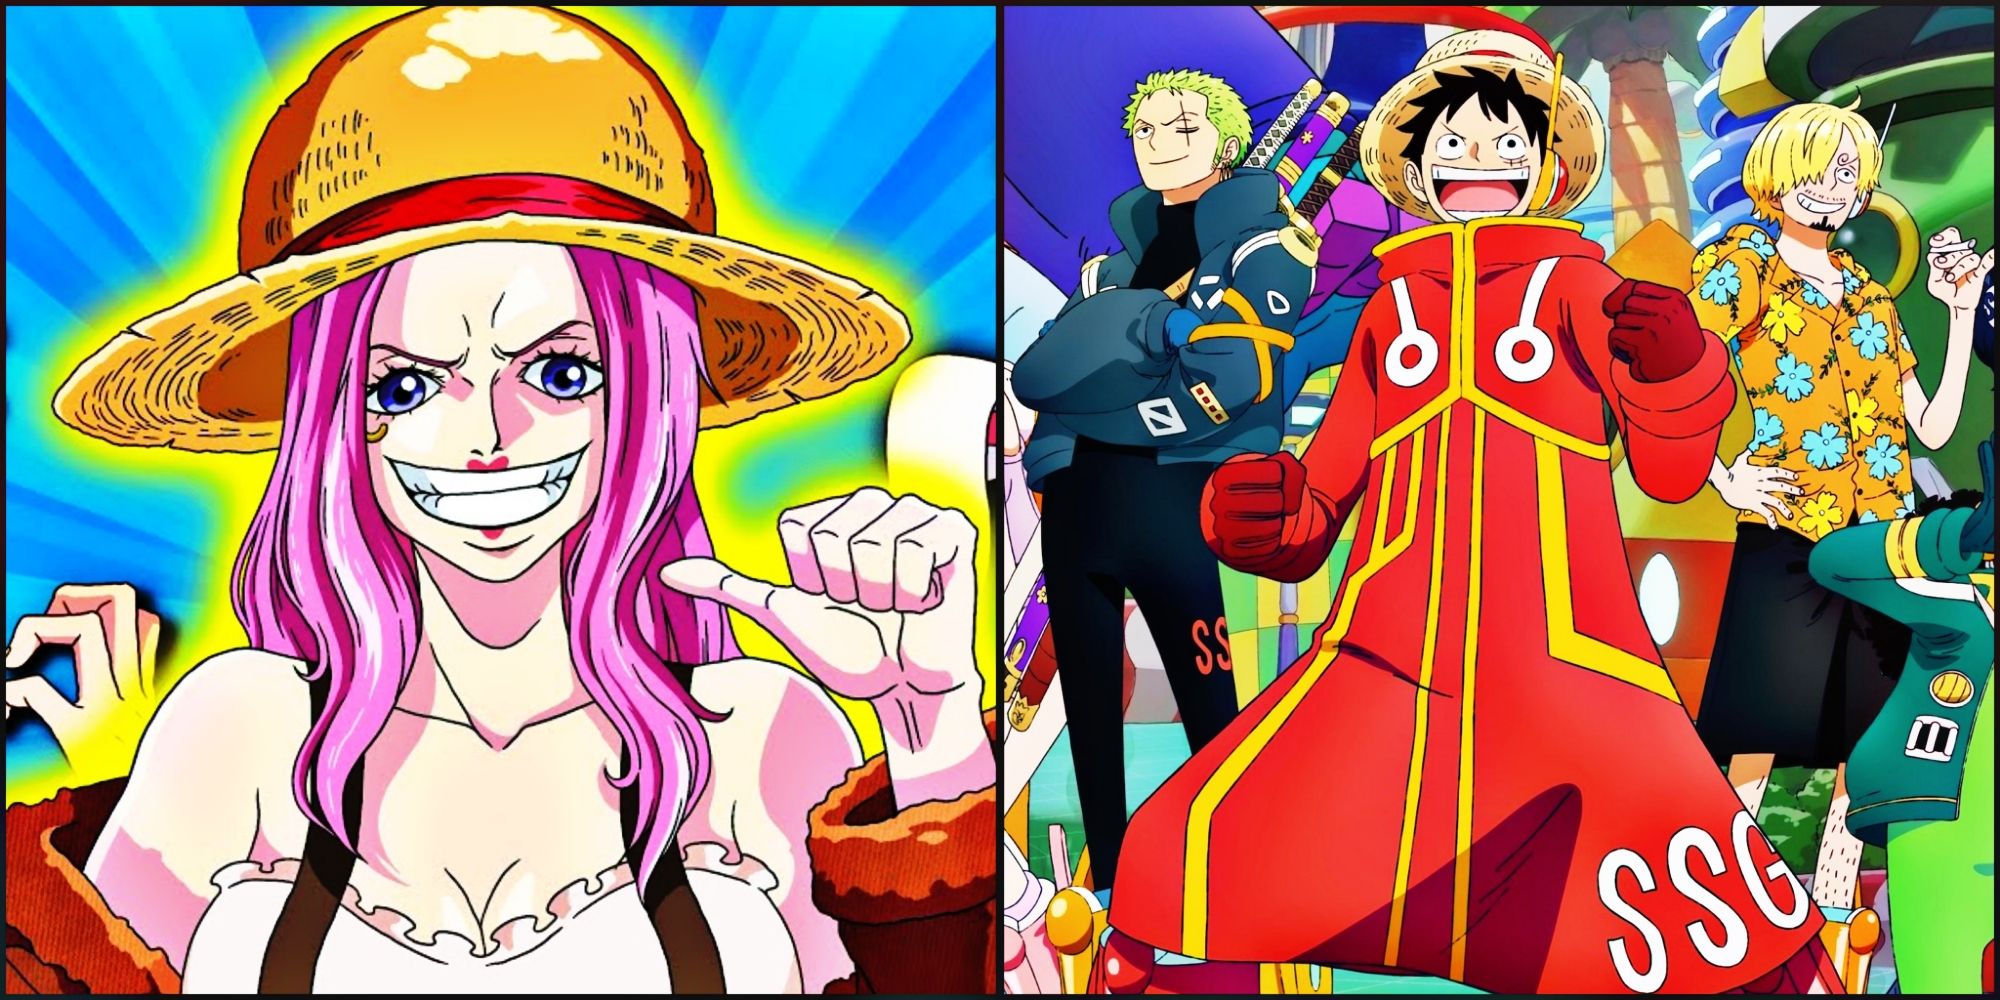 One Piece's New Straw Hat Designs Make Them Look Cooler Than Ever in New Art